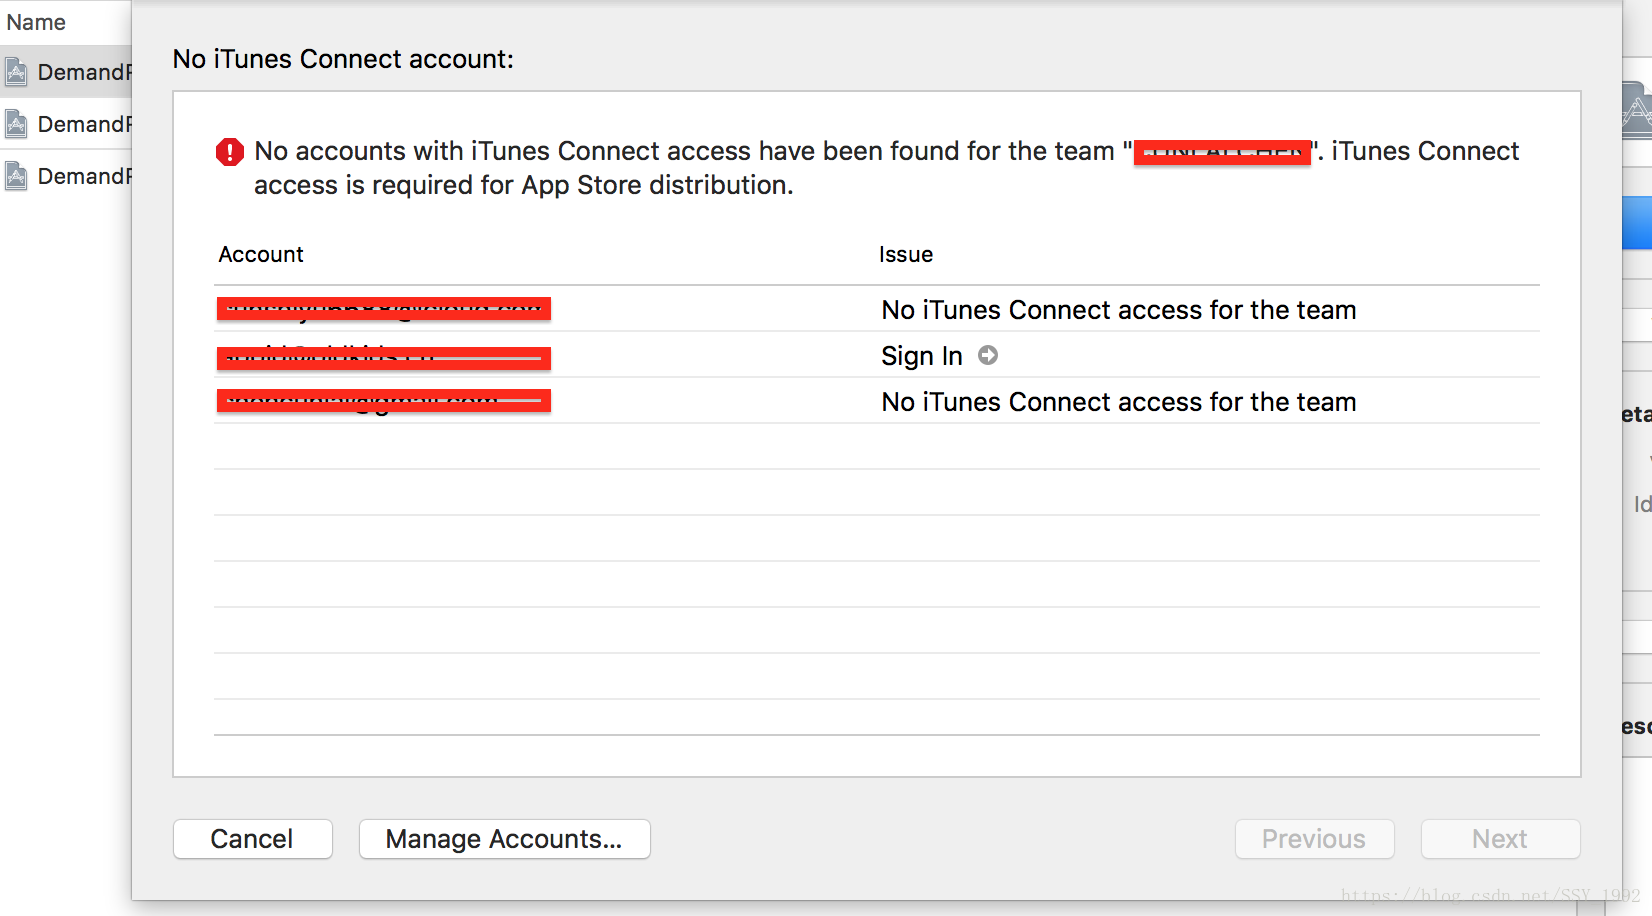 Ios No Account With Itunes Connect Access Have Been Found For The Team Itunes Connect Access Is Ssy 1992的博客 Csdn博客